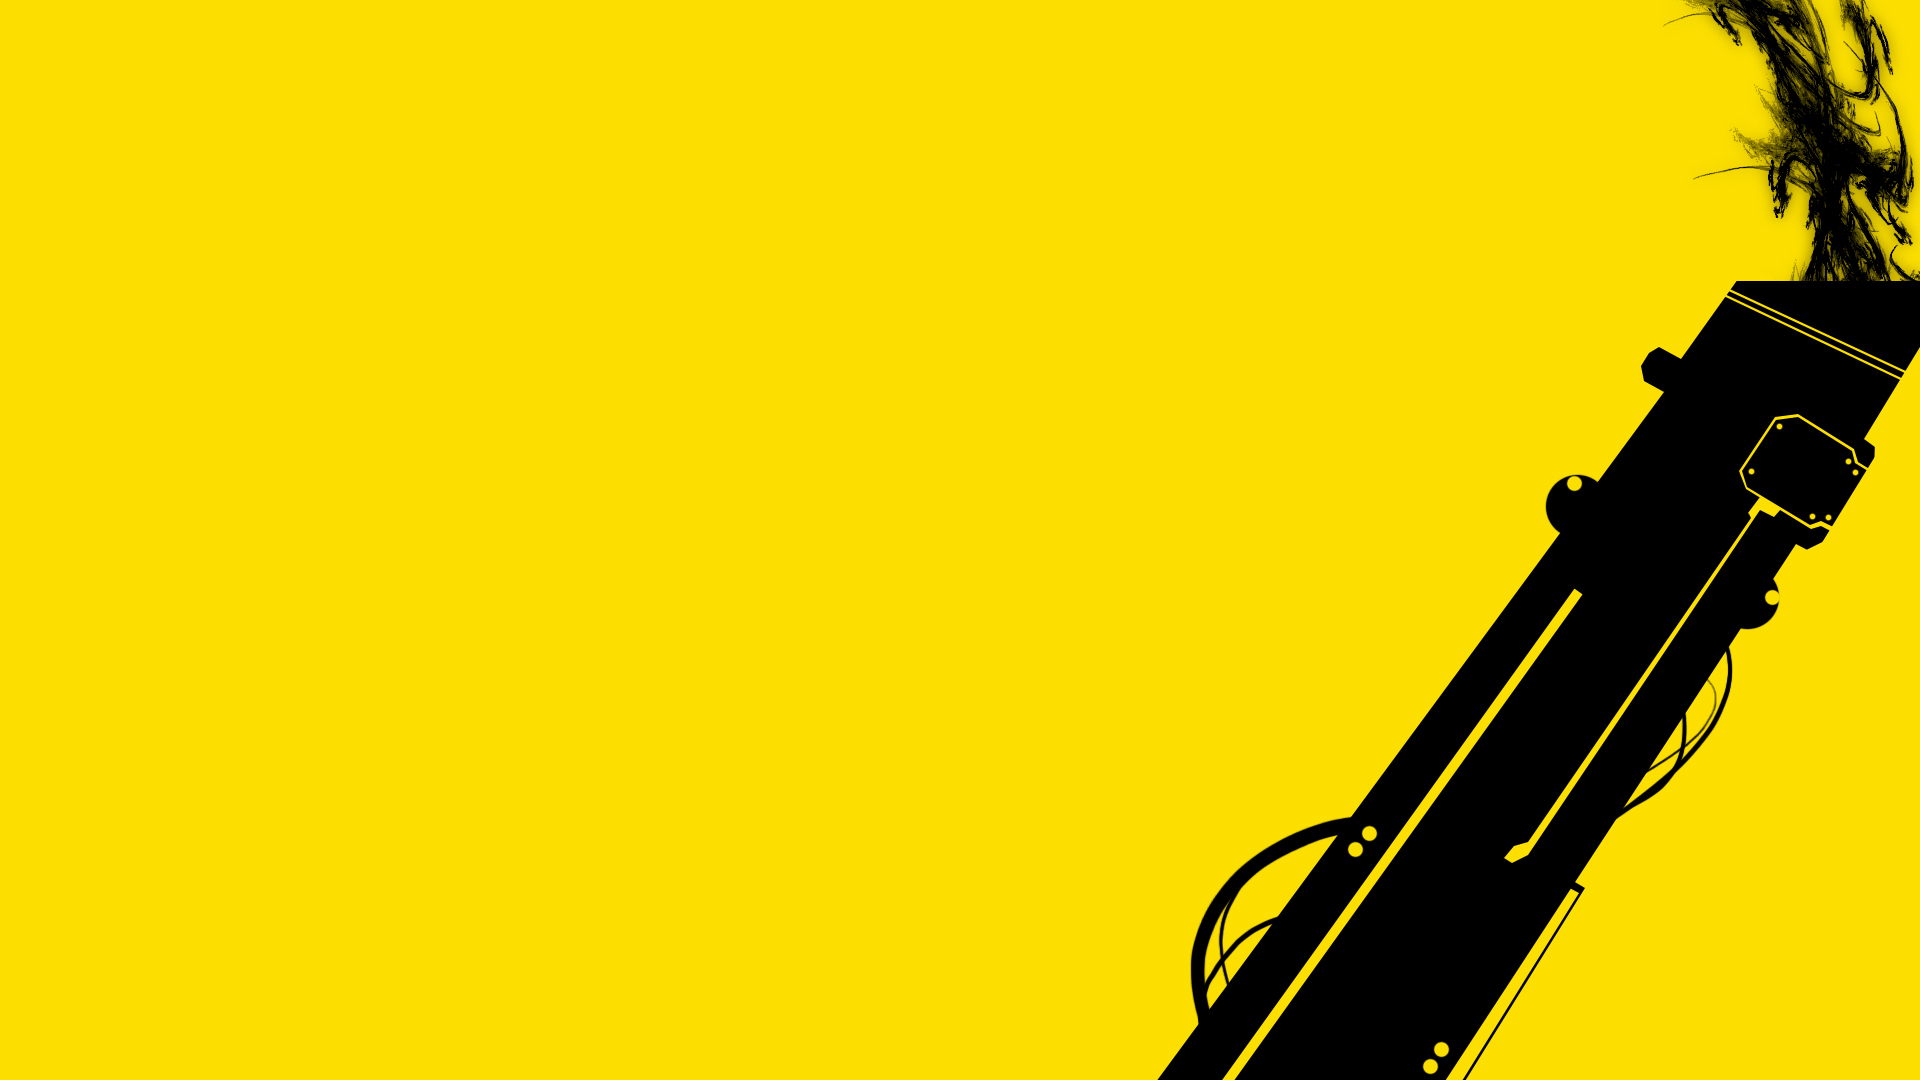 Black Gun On Yellow Background Wallpaper Pc With